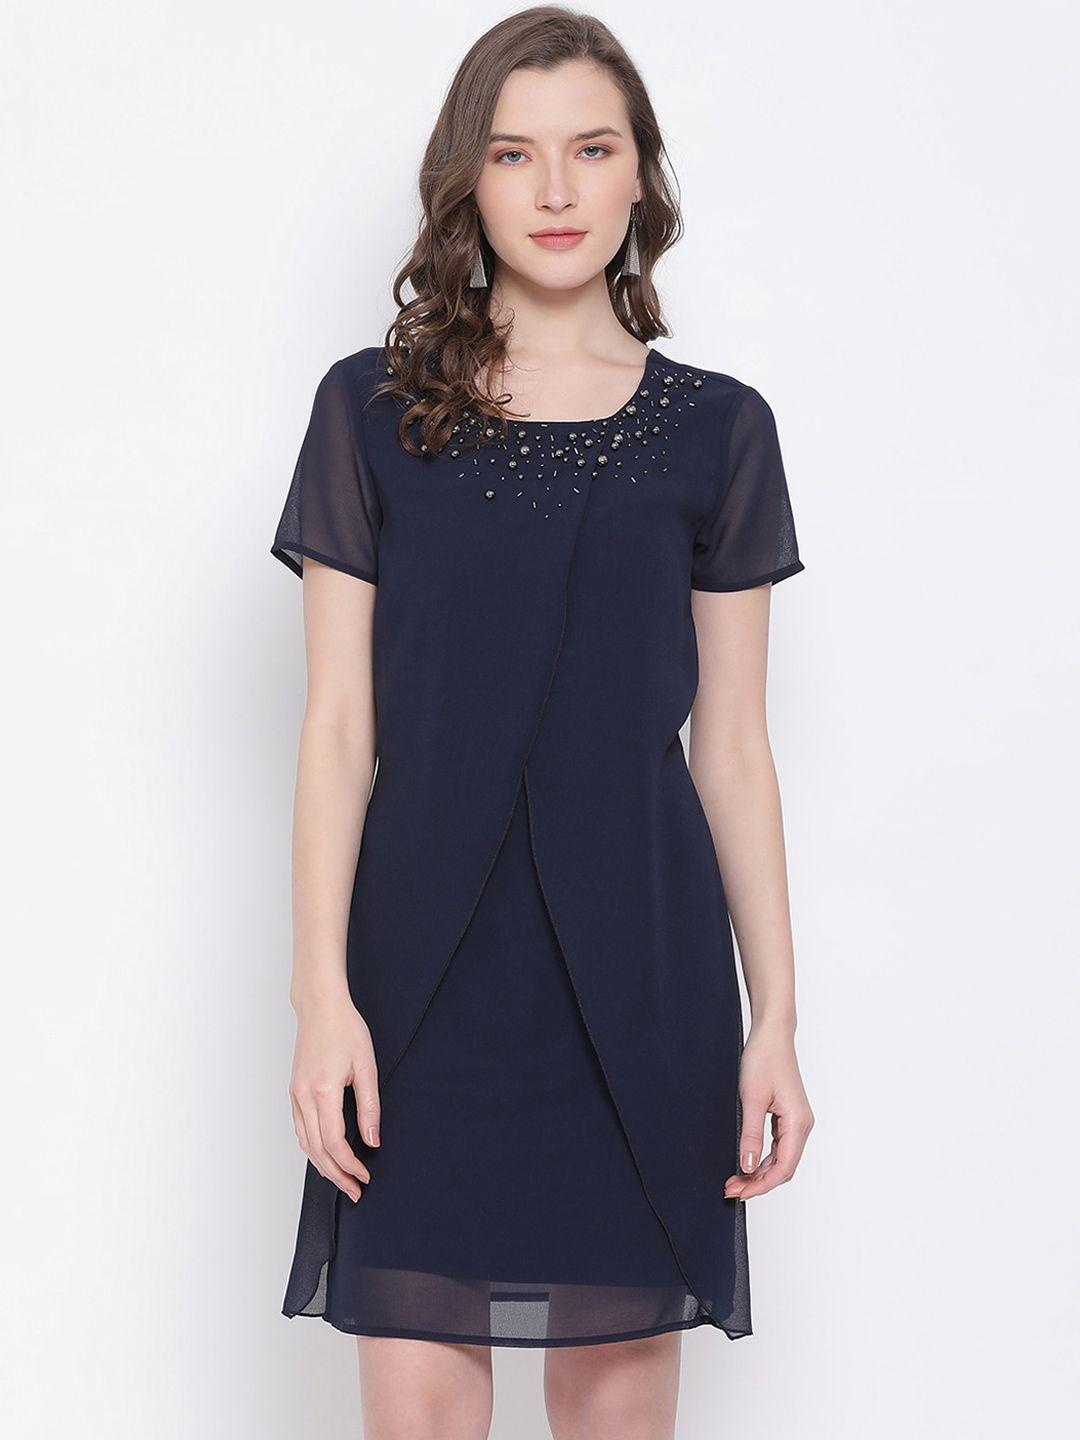 ly2 women navy blue solid wrap dress